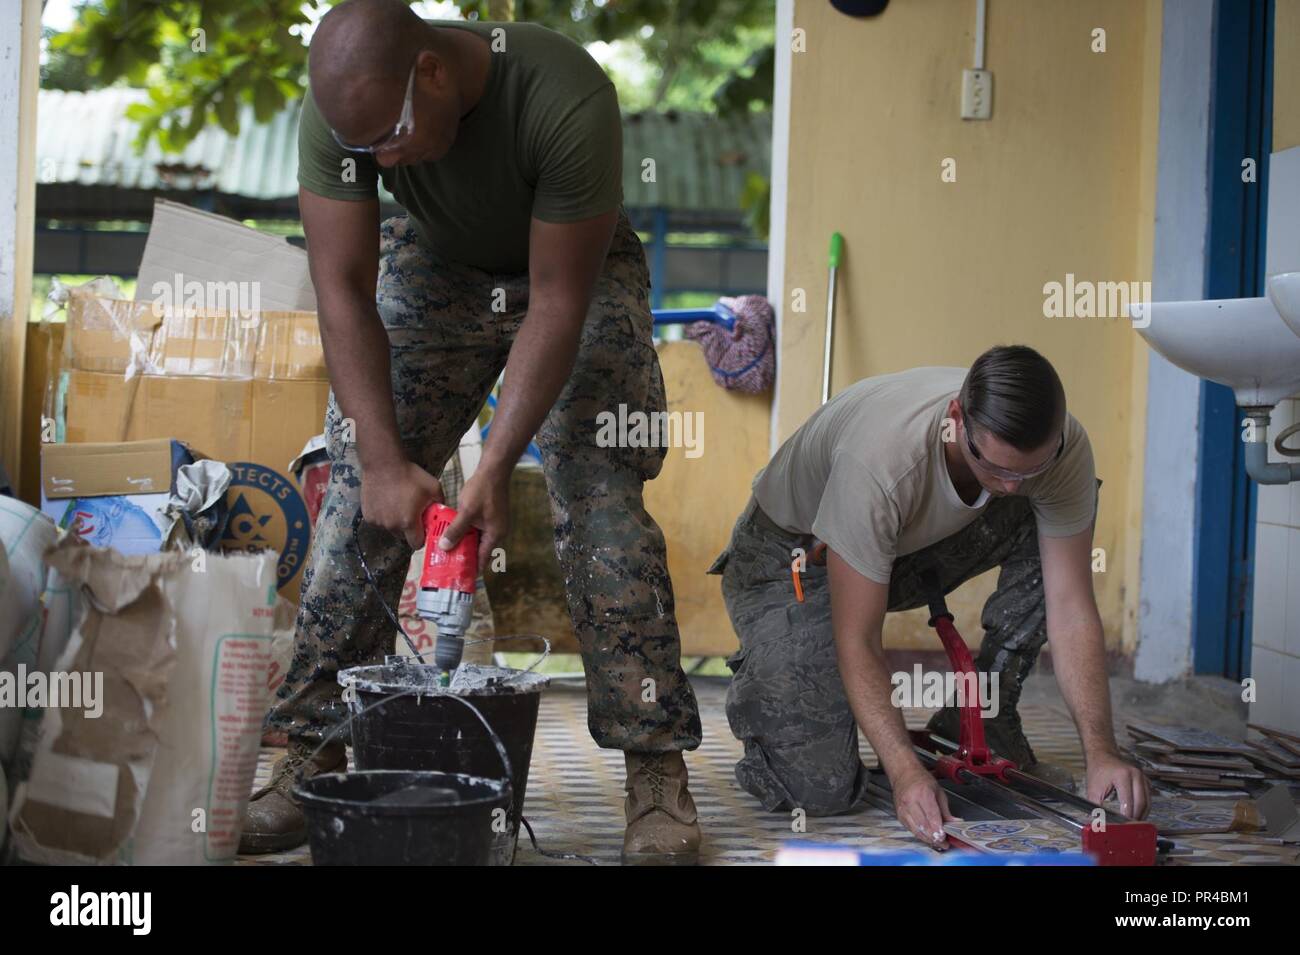 (Left) U.S. Marine Corps Sgt. David Tyson, 7th Engineer Support Battalion combat engineer, mixes grout as U.S. Air Force Staff Sgt. Zach Julian, 145th Airlift Wing water and fuel system maintenance craftsman, cuts tile during Pacific Angel (PAC ANGEL) 18-2 at Nguyen Hien Junior High School in in Phu Thinh town, Phu Ninh district, Vietnam, Sept. 11, 2018. During PAC ANGEL 18-2 civil engineers worked on repairs, refurbishing and upgrades to eight existing rural medical and school facilities. PAC ANGEL is a multilateral humanitarian assistance civil military engagement, which improves military-to Stock Photo